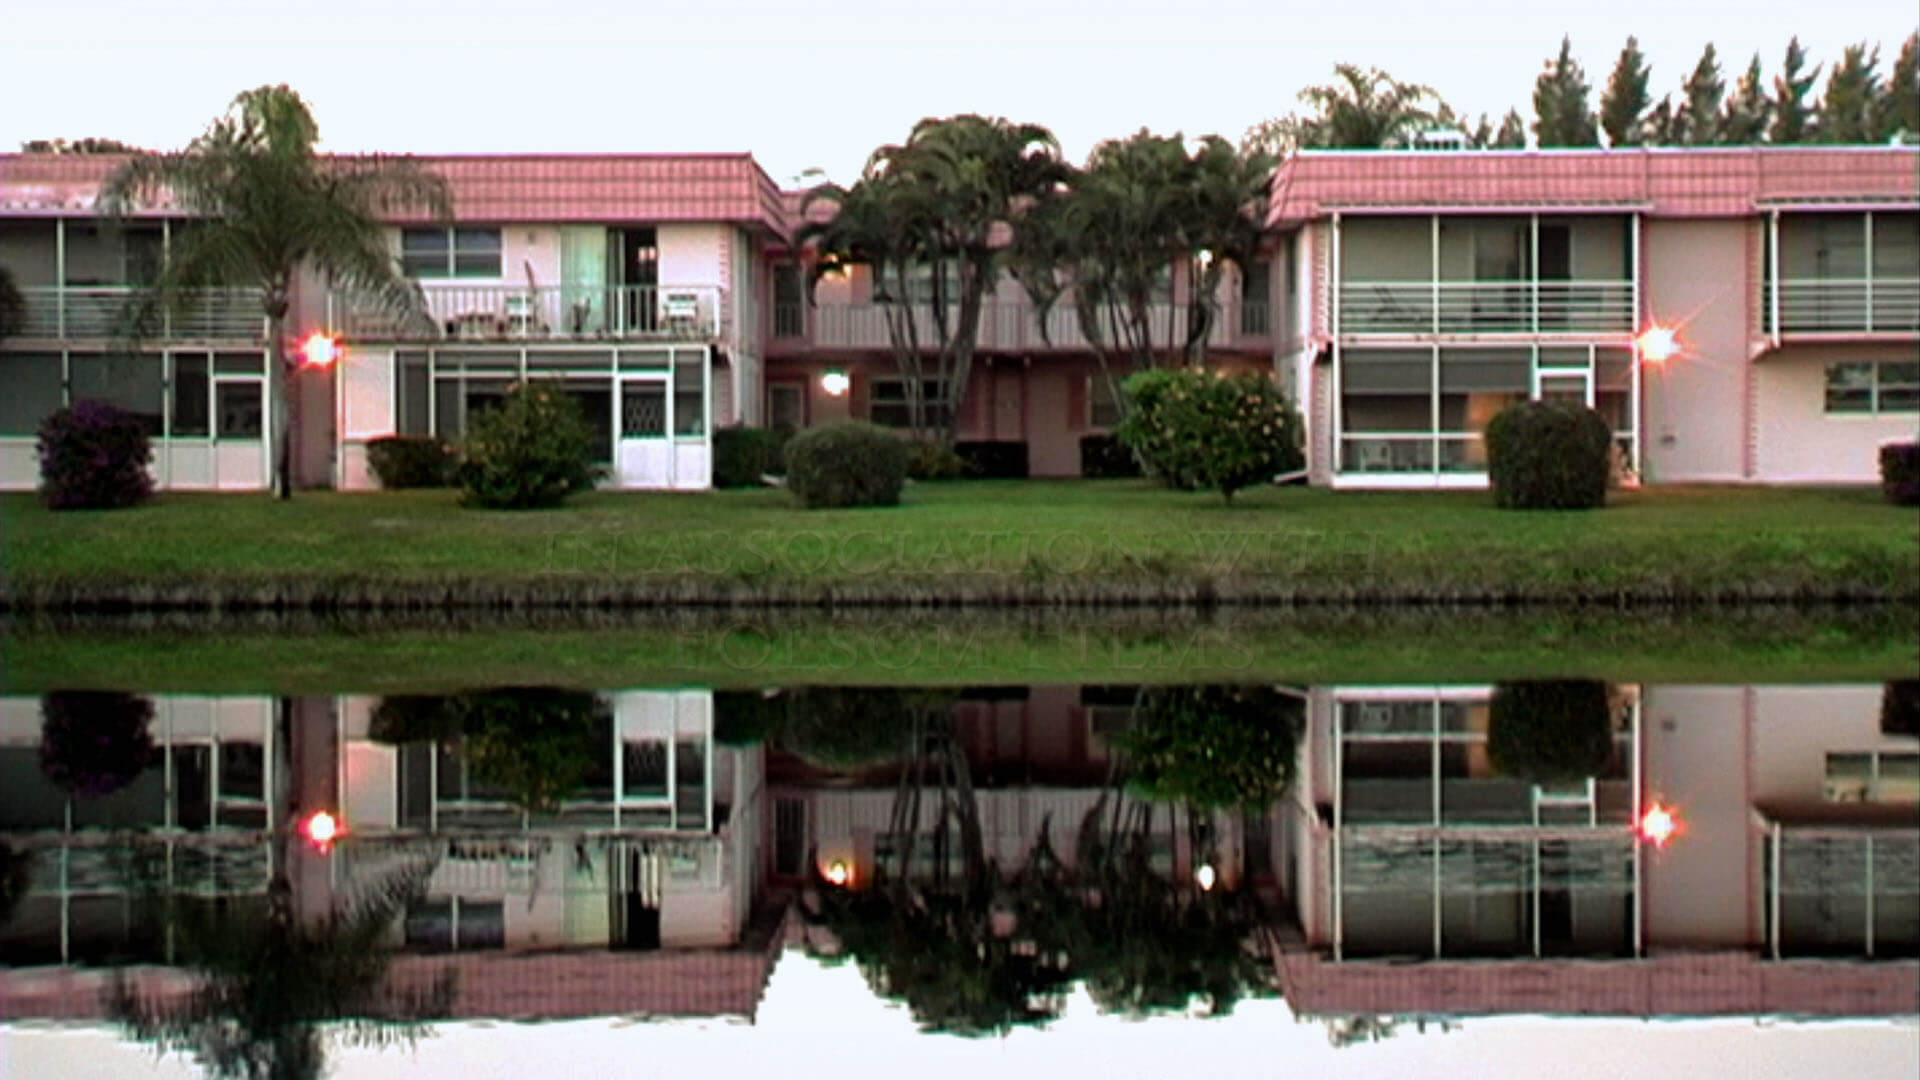 Still of the film Kings Point. A full shot of two pink houses next to each other, there are two trees between them. Their reflection is seen in the body of water in front of them.